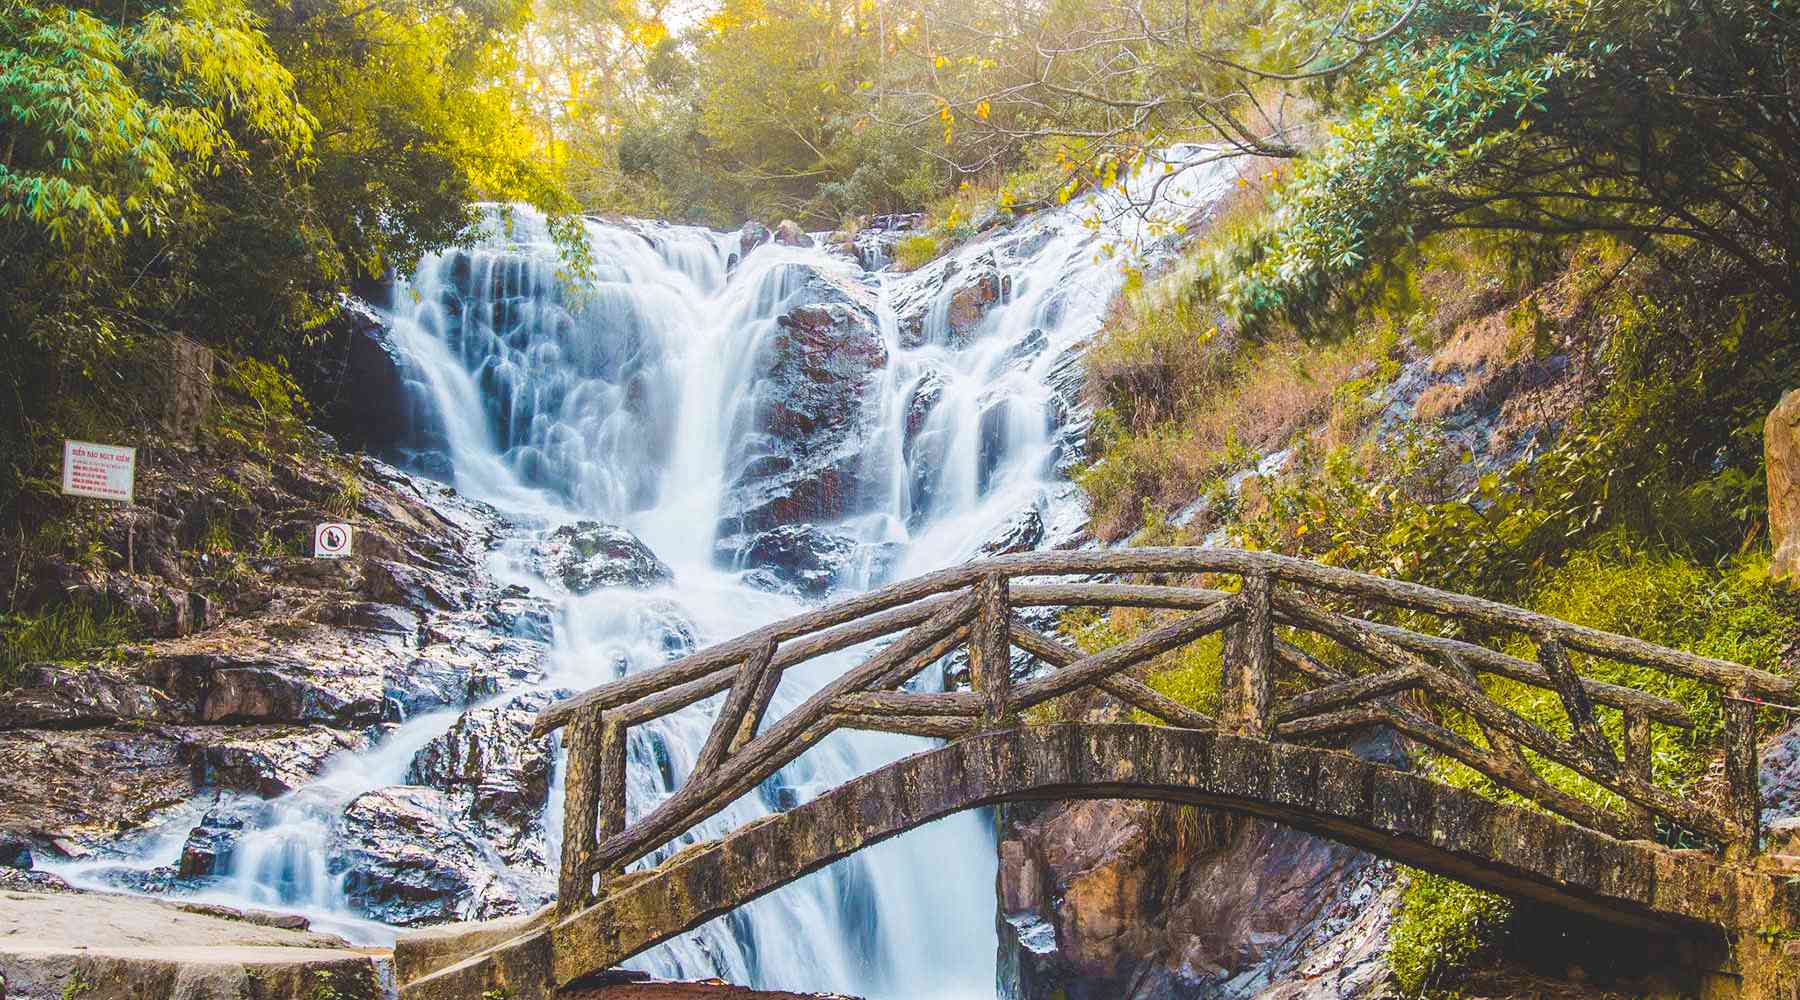 Venture into a world of natural beauty and adventure. Explore the majestic Datanla Waterfall and create lasting memories - Da Lat Waterfalls